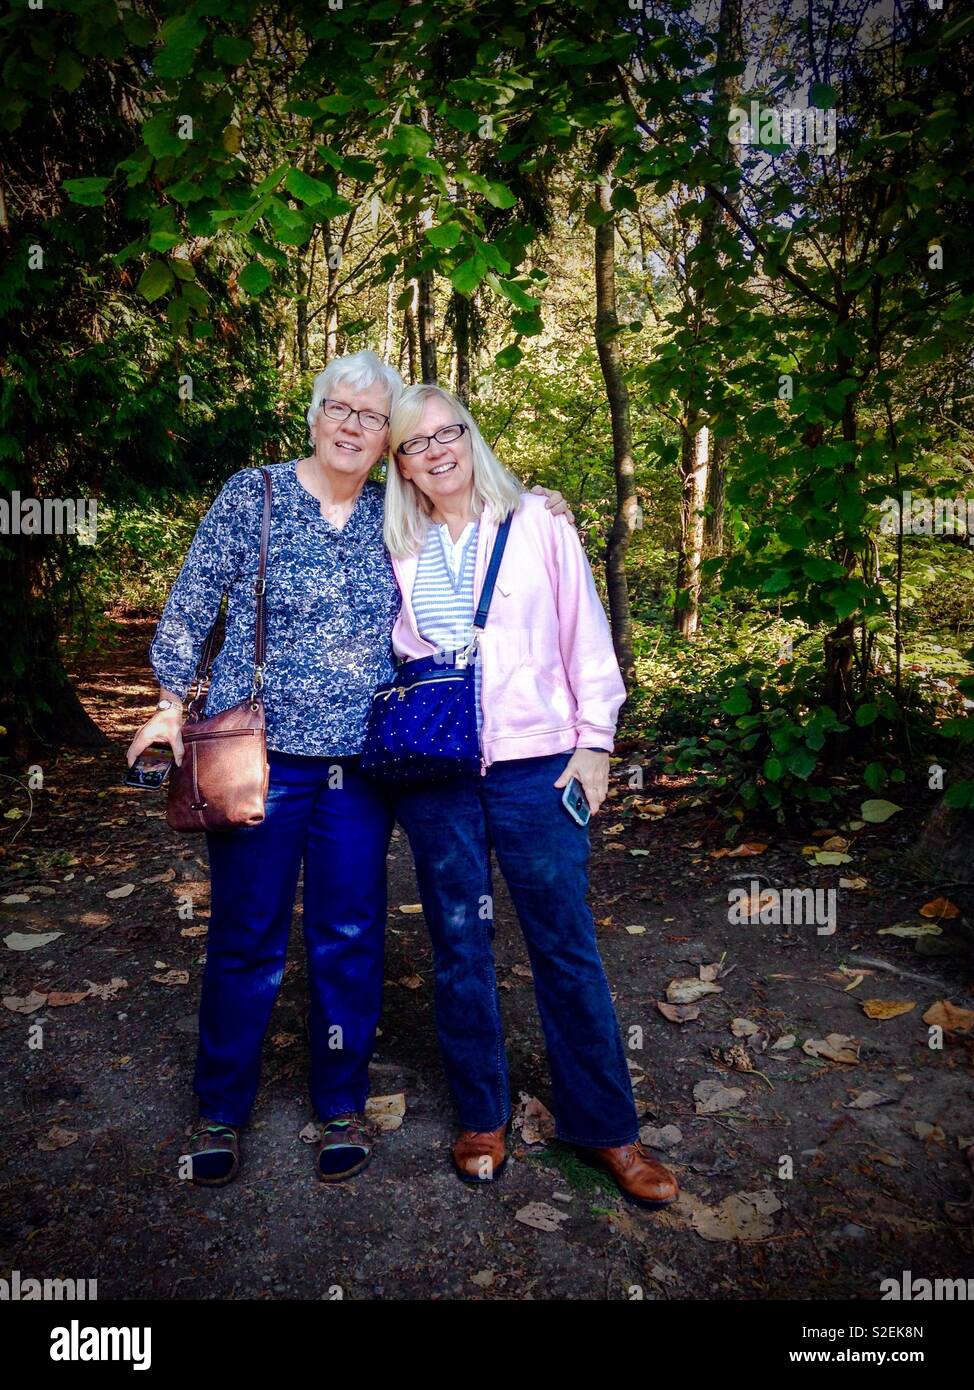 Sister love in a Seattle park Stock Photo